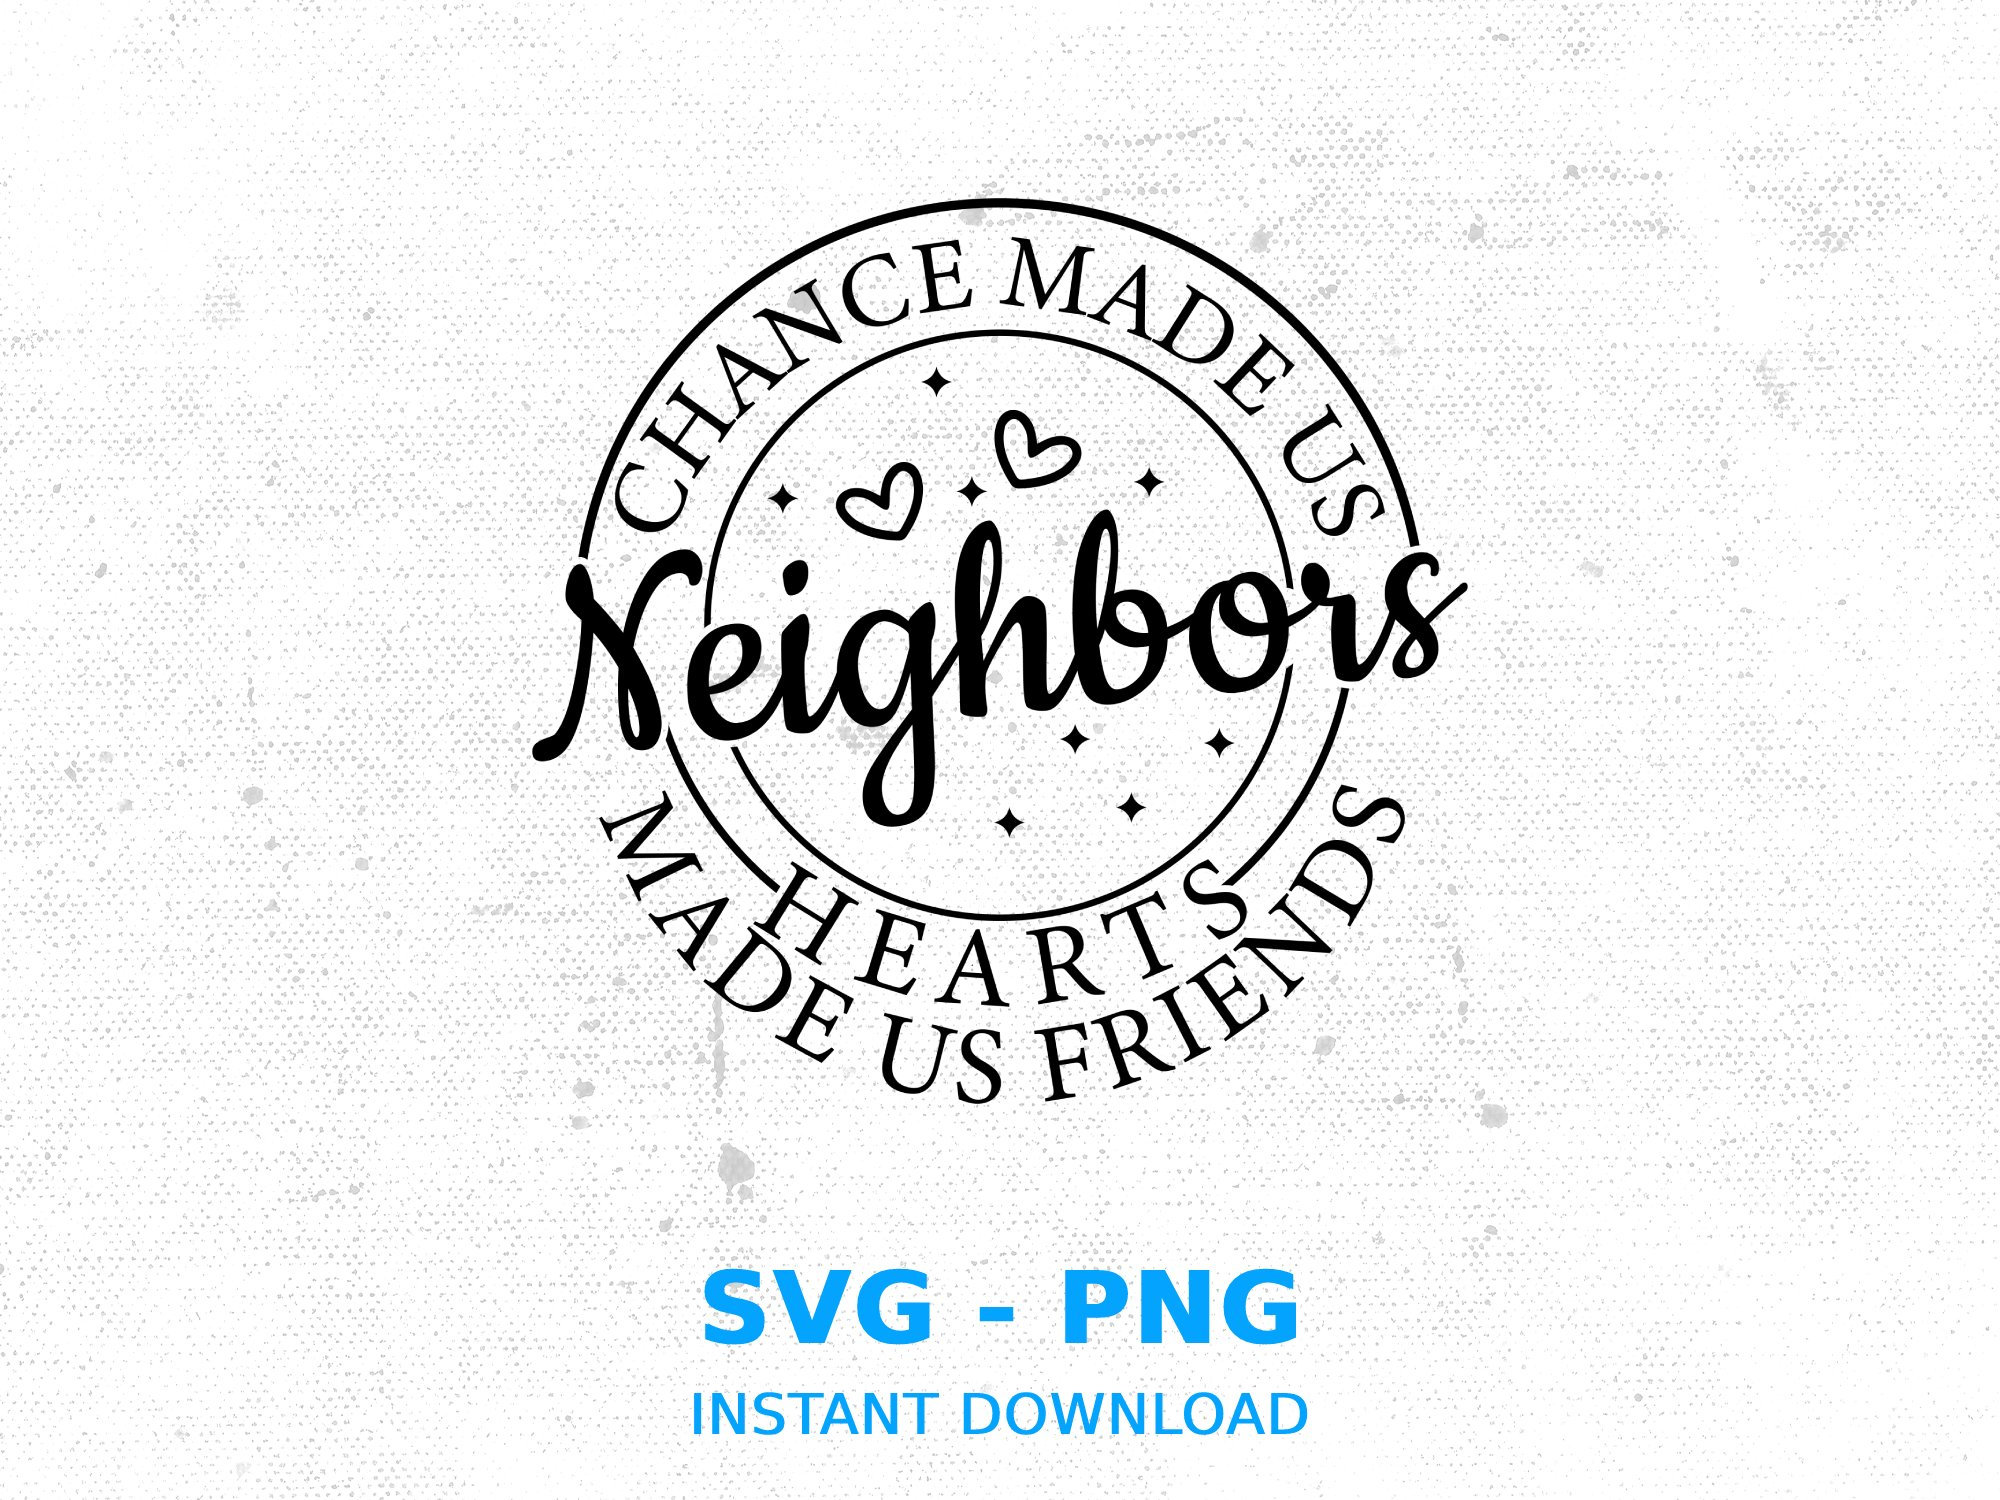 Chance Made Us Neighbors Hearts Make Us Friends - Personalized